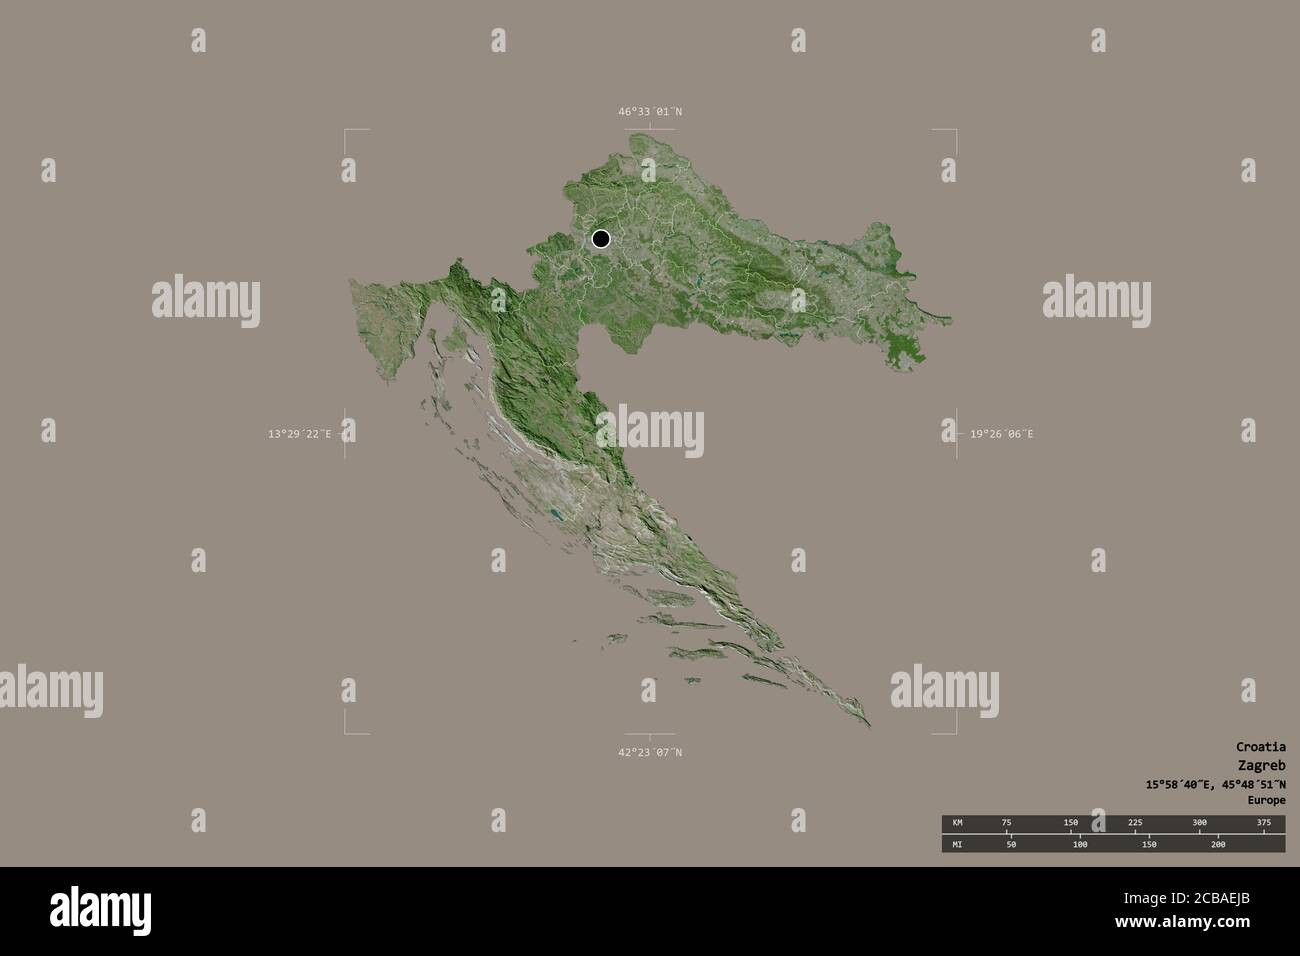 Area of Croatia isolated on a solid background in a georeferenced bounding box. Main regional division, distance scale, labels. Satellite imagery. 3D Stock Photo